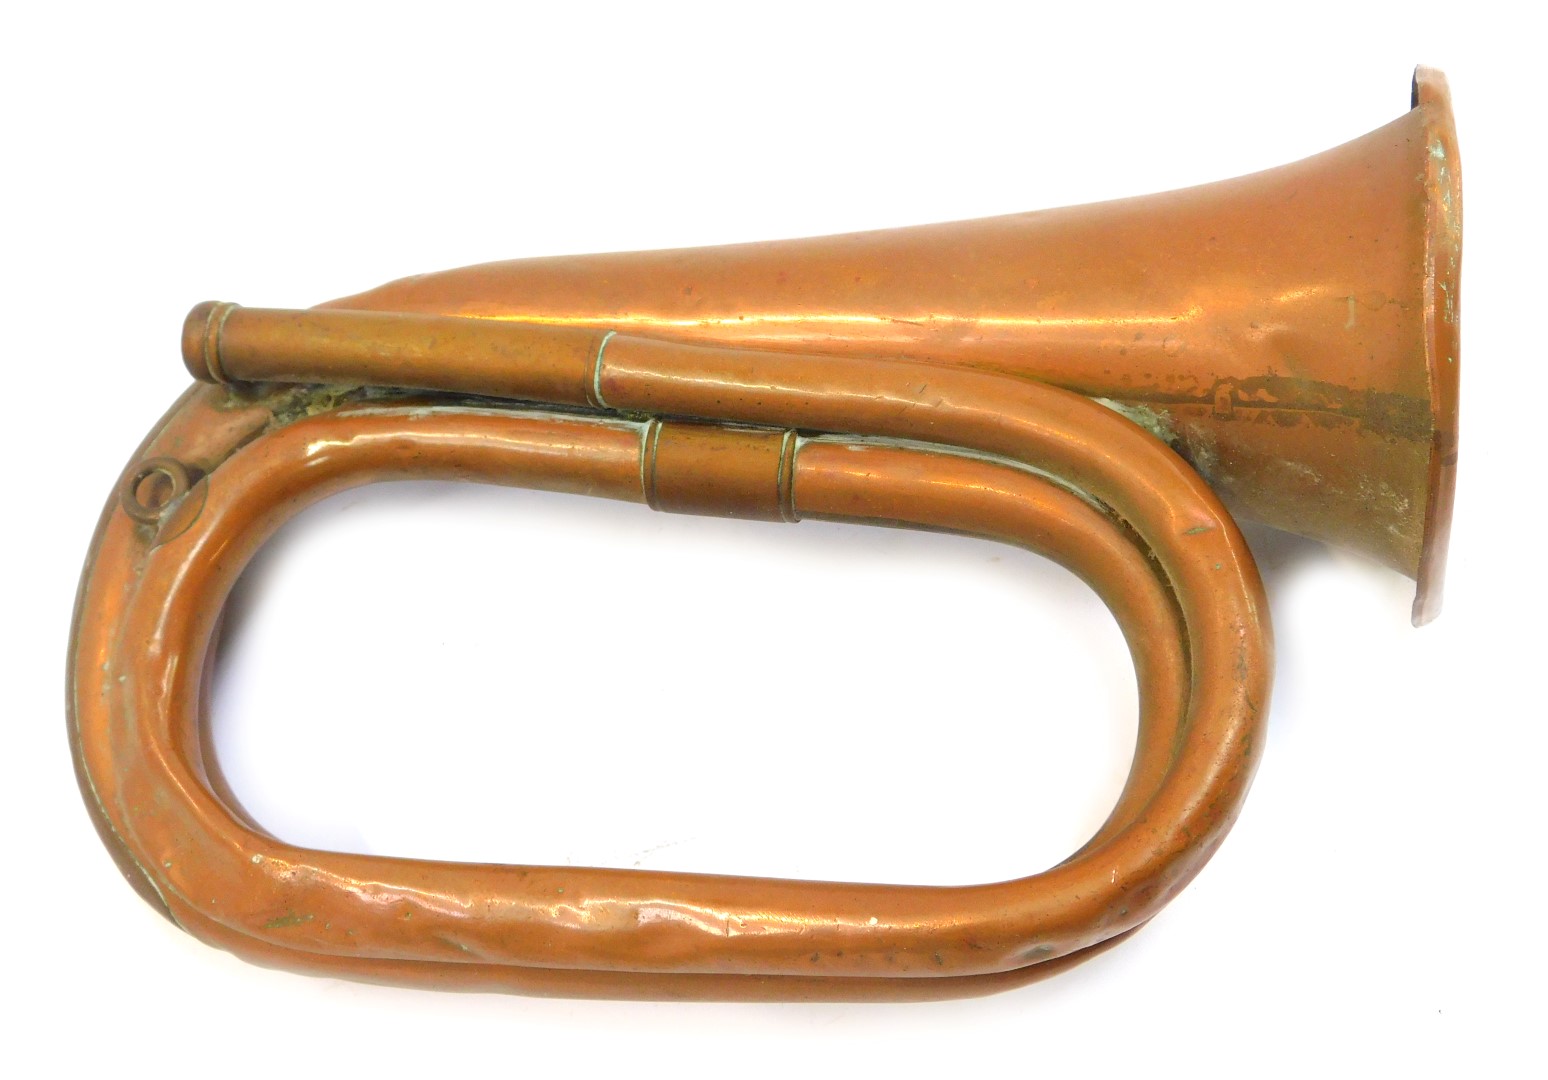 A Besson and Co London copper bugle, dated 1940, 24.5cm long.